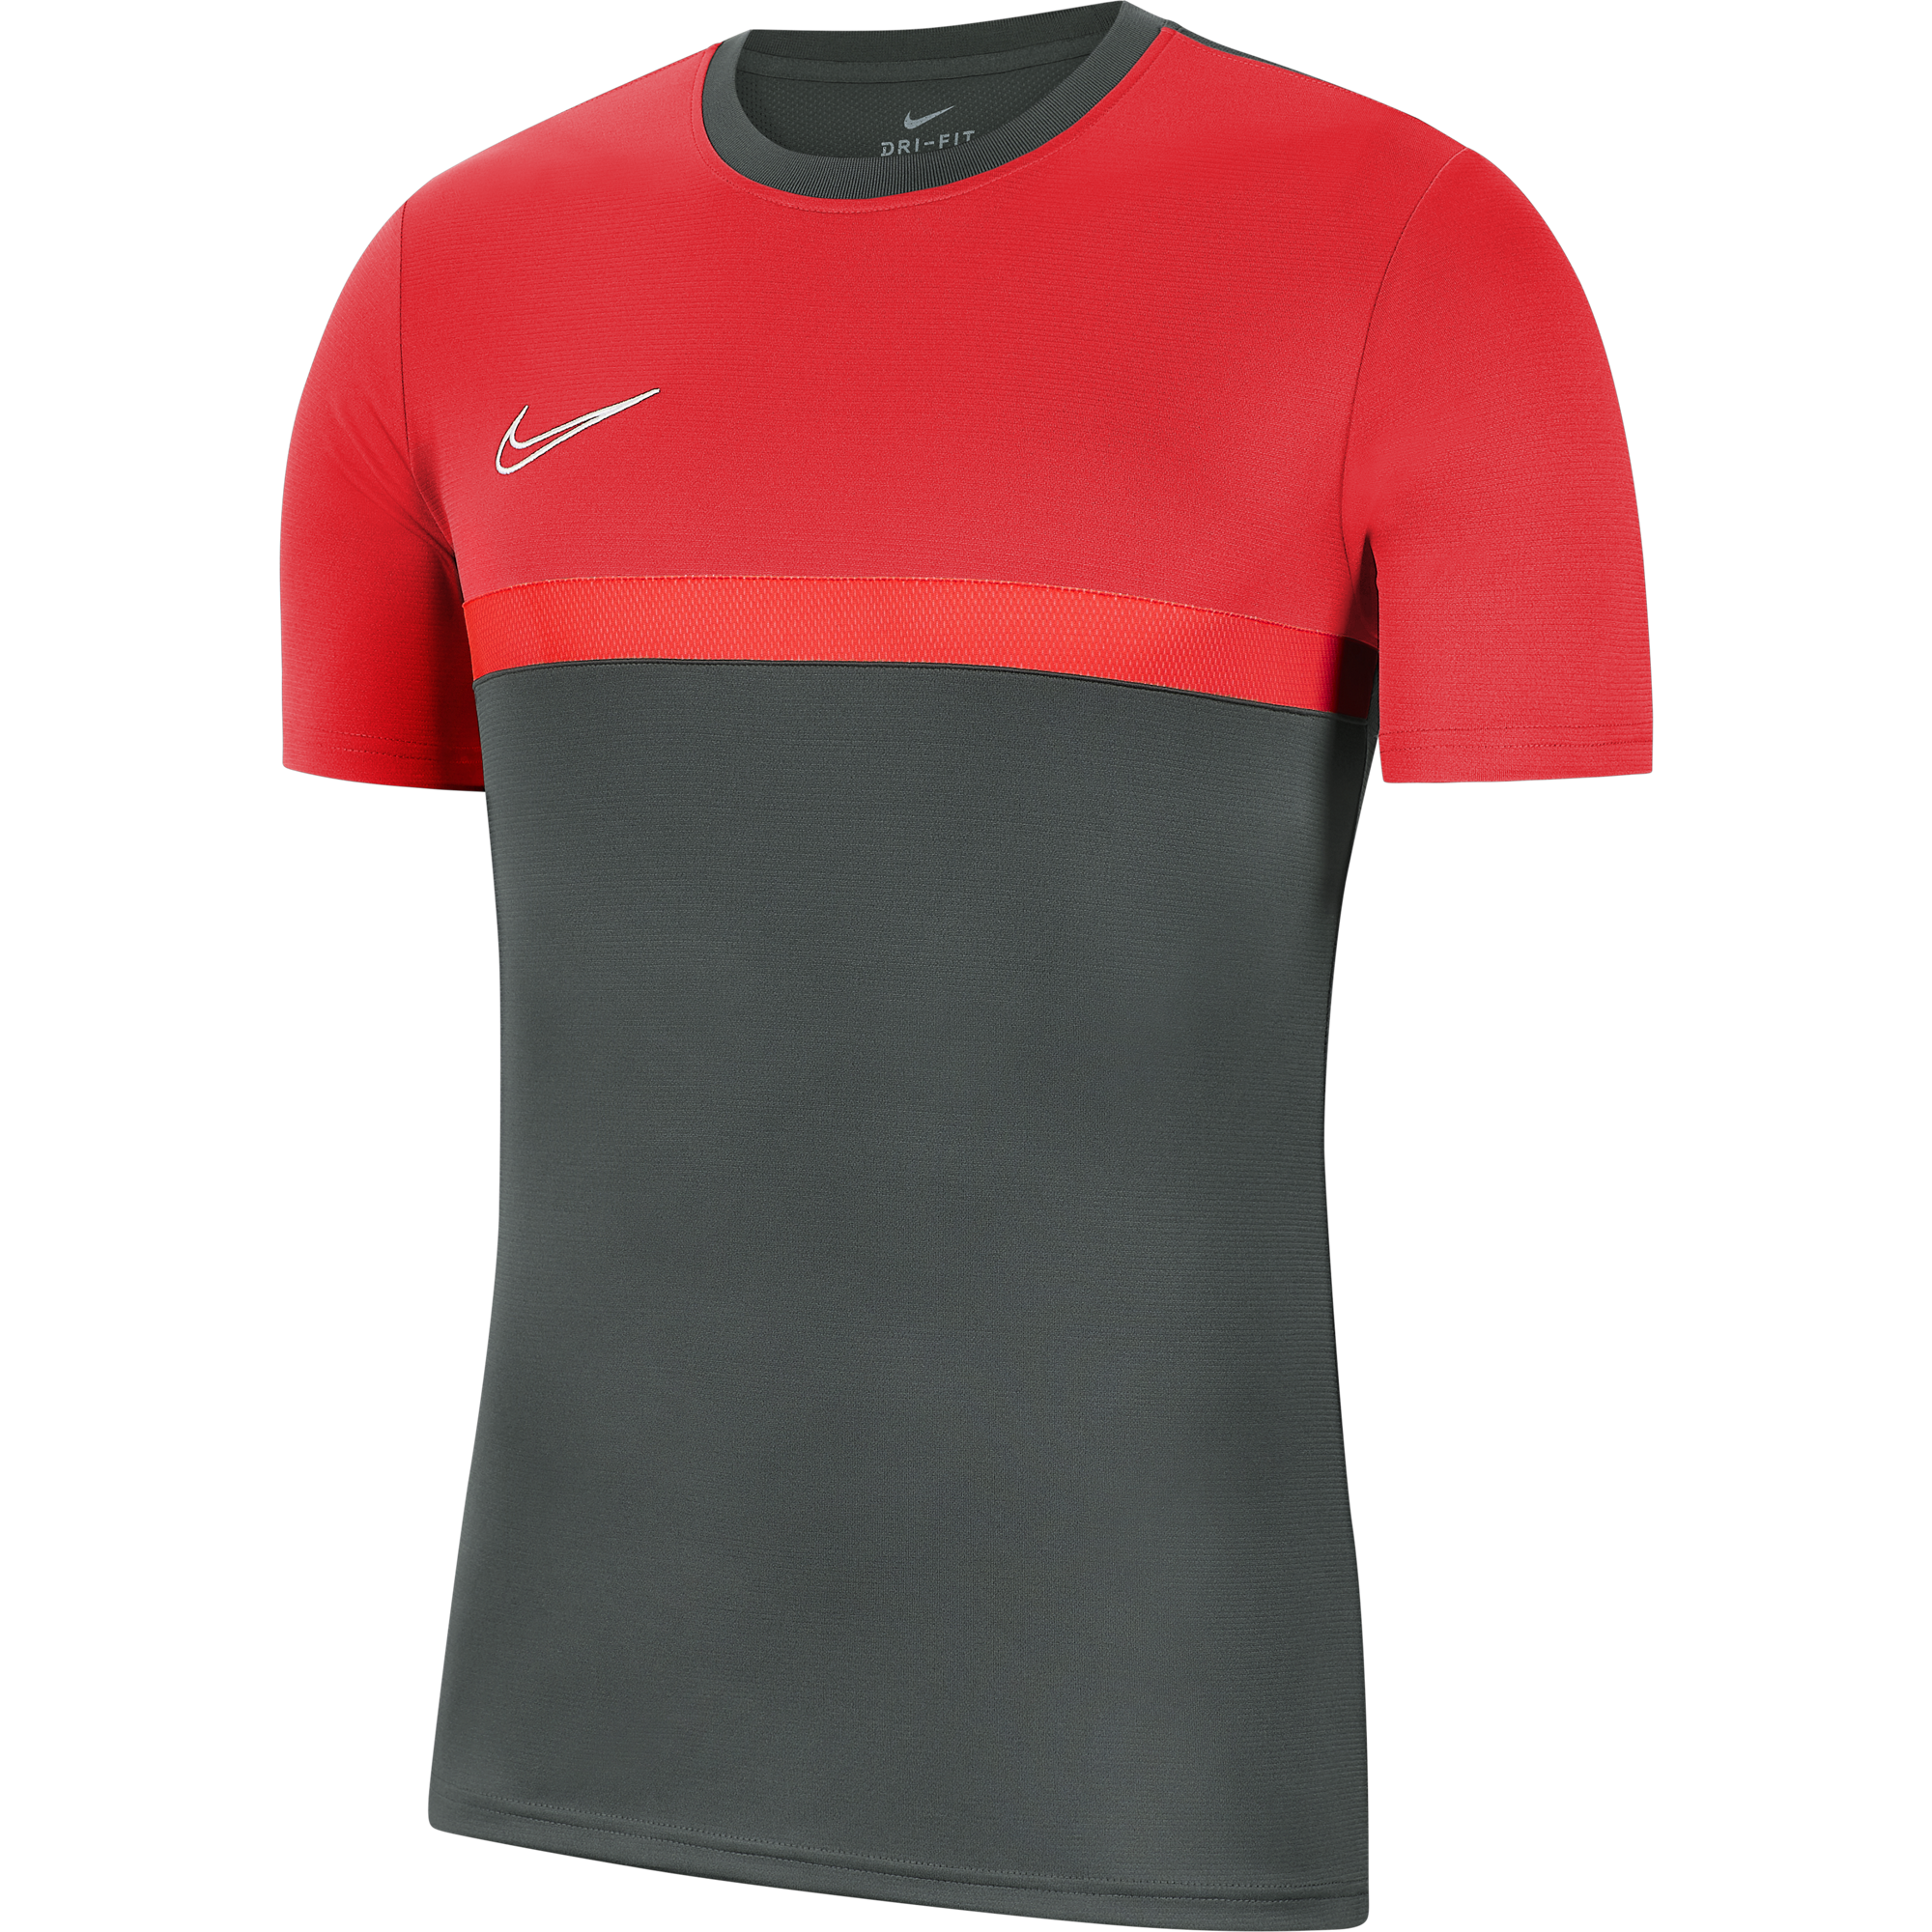 Academy Pro 20 Top (Youth)